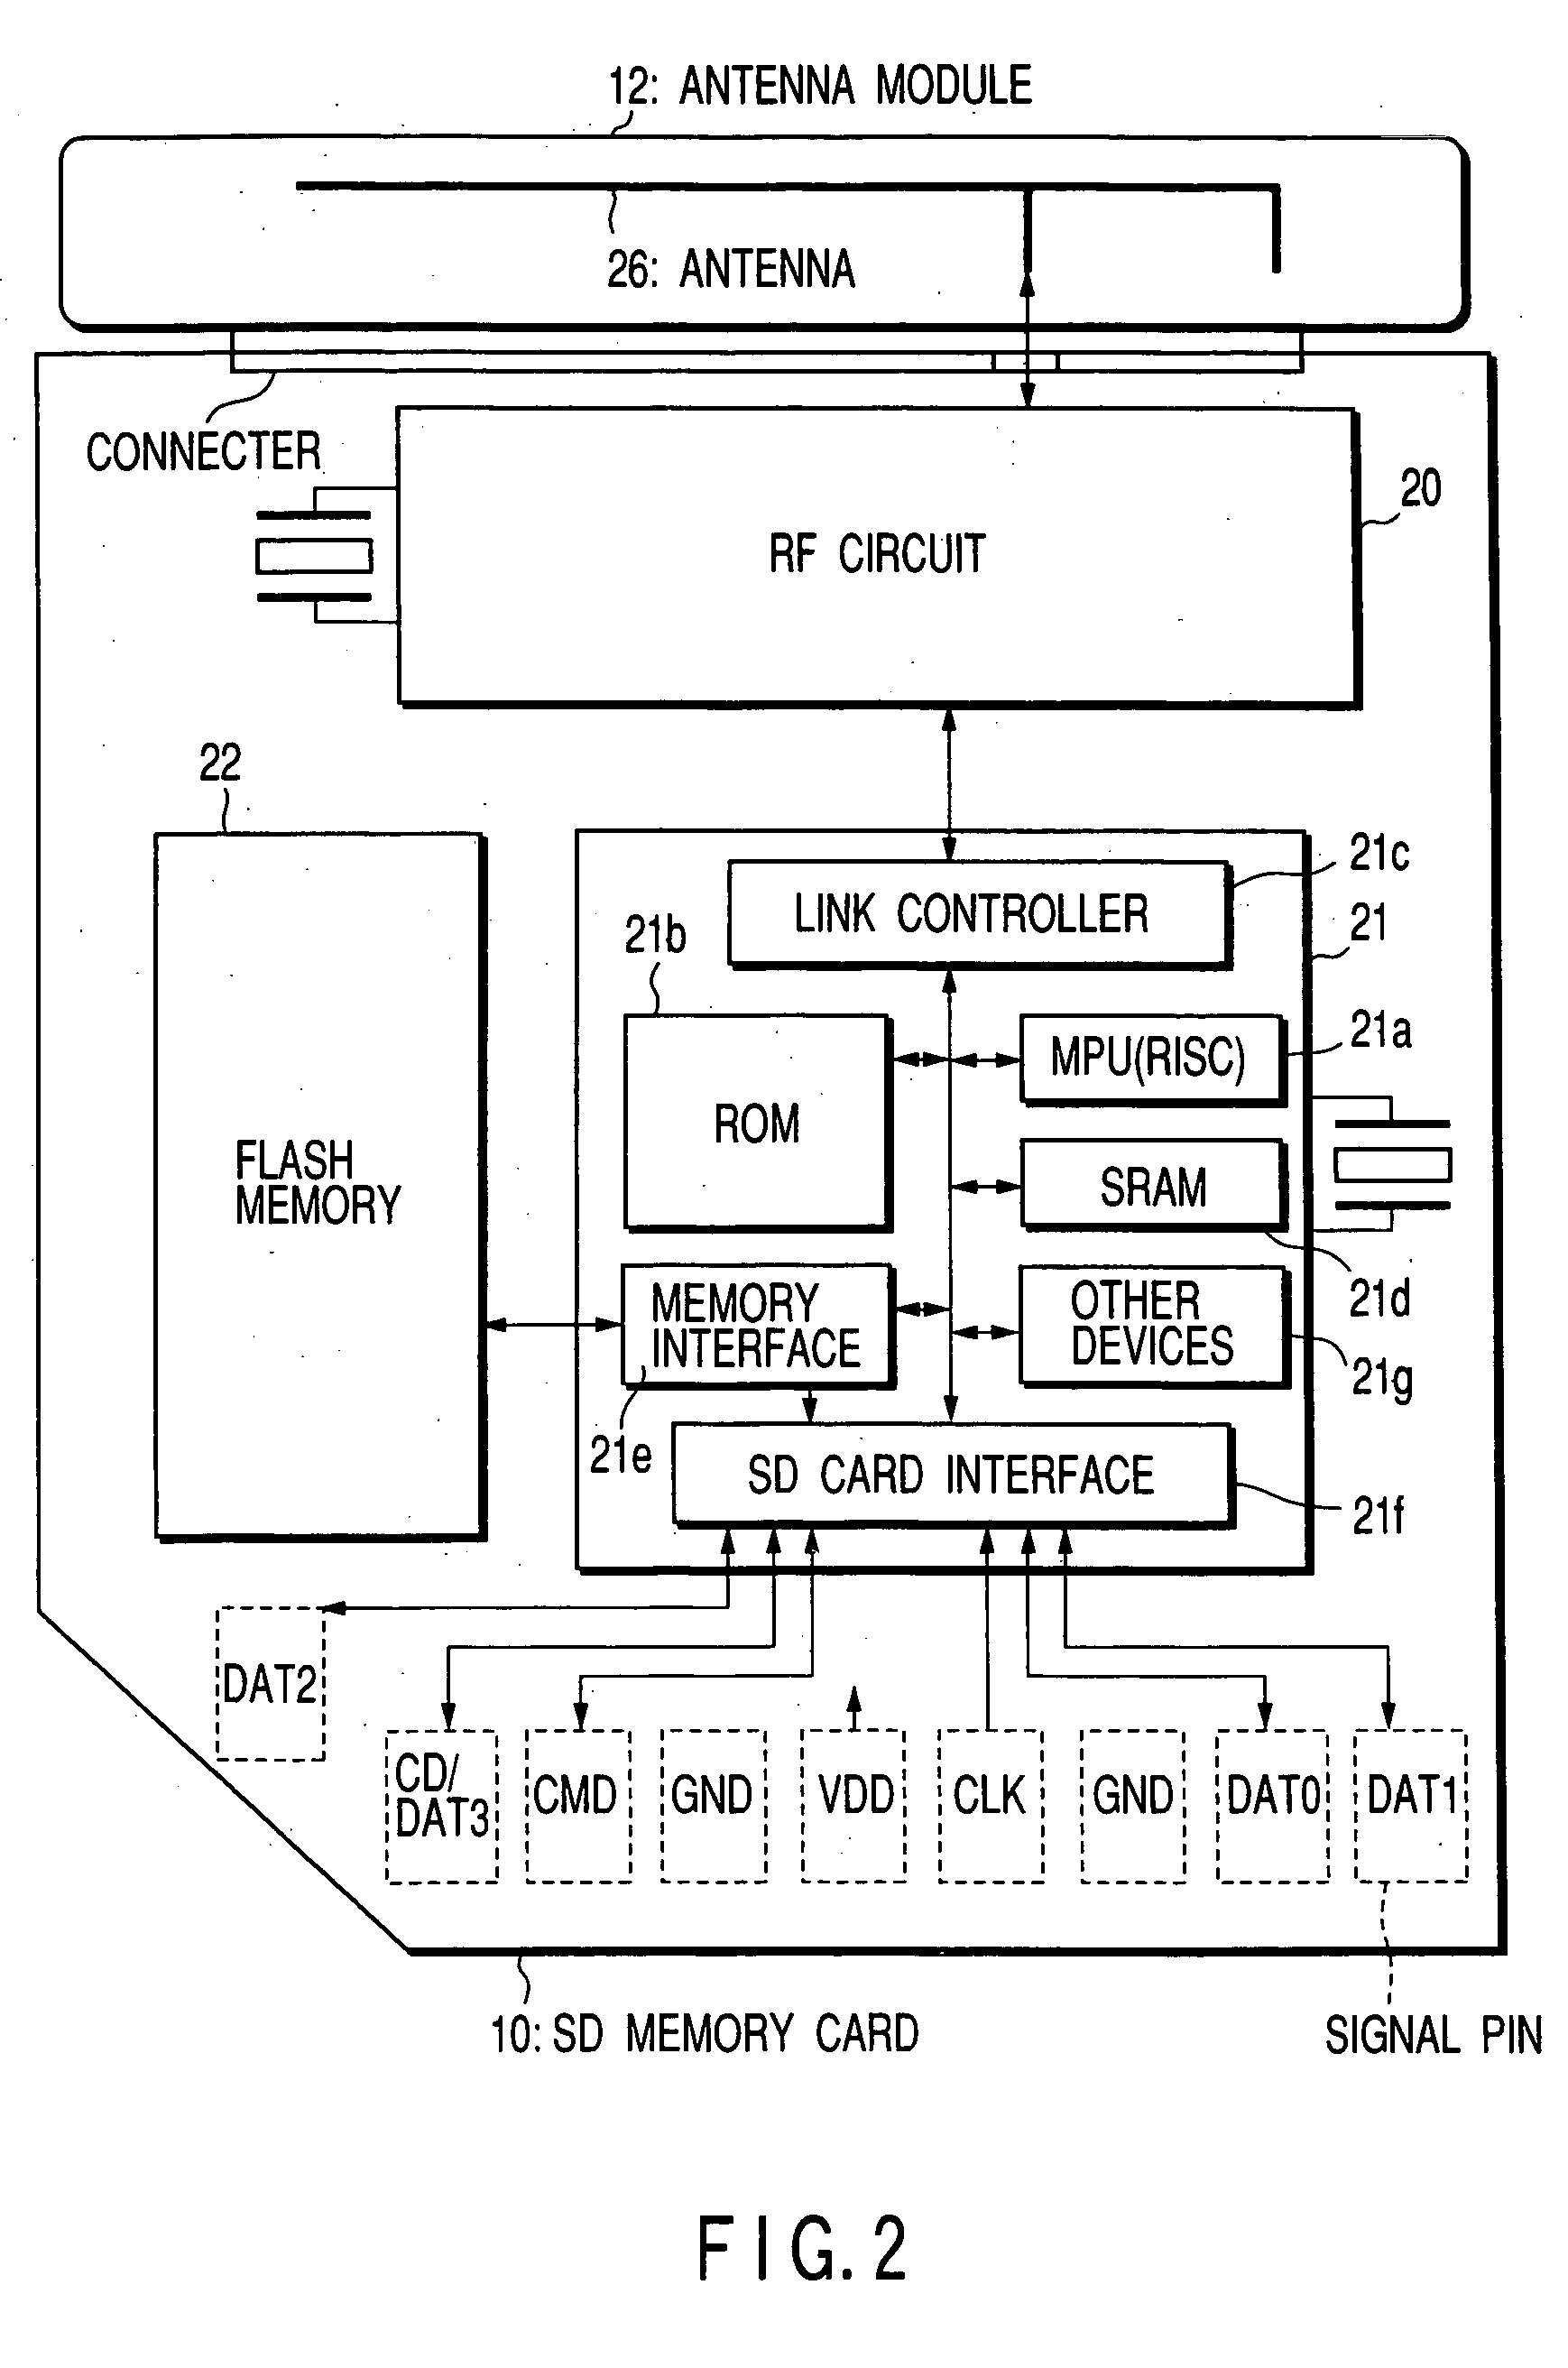 IC card with radio interface function, antenna module and data processing apparatus using the IC card